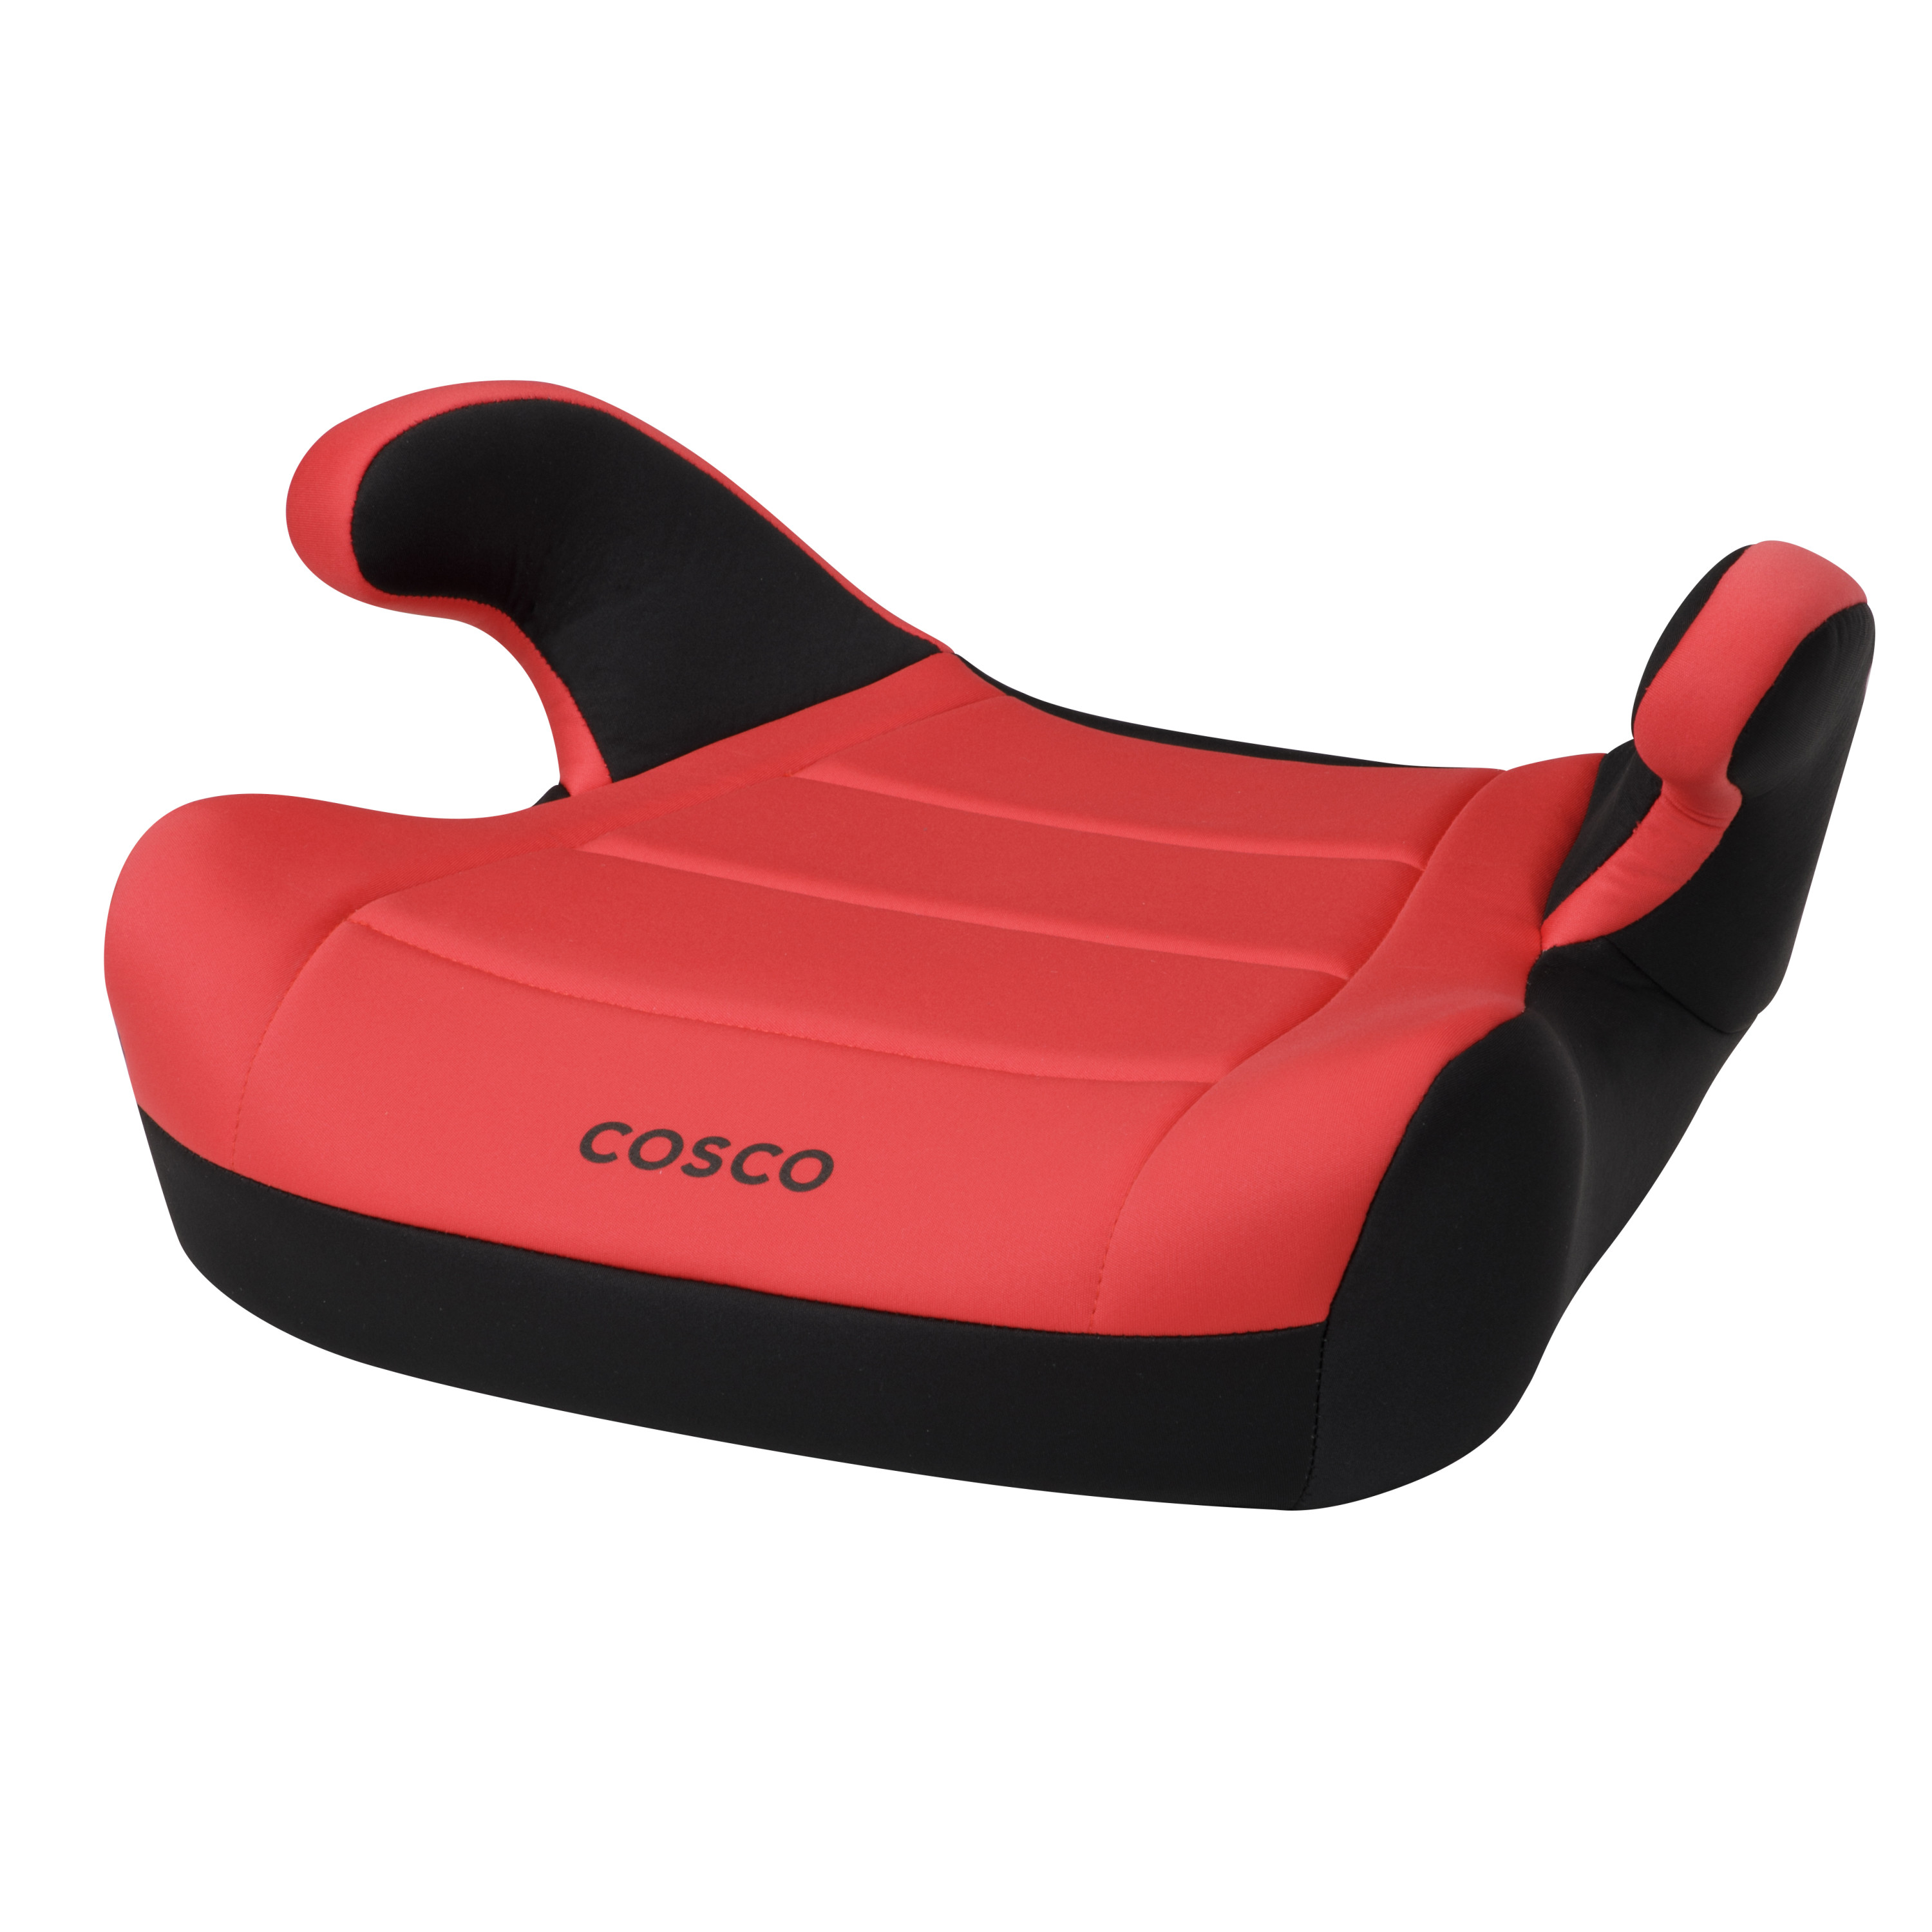 Cosco Kids Rise LX Booster Car Seat, Racecar Red - image 1 of 15